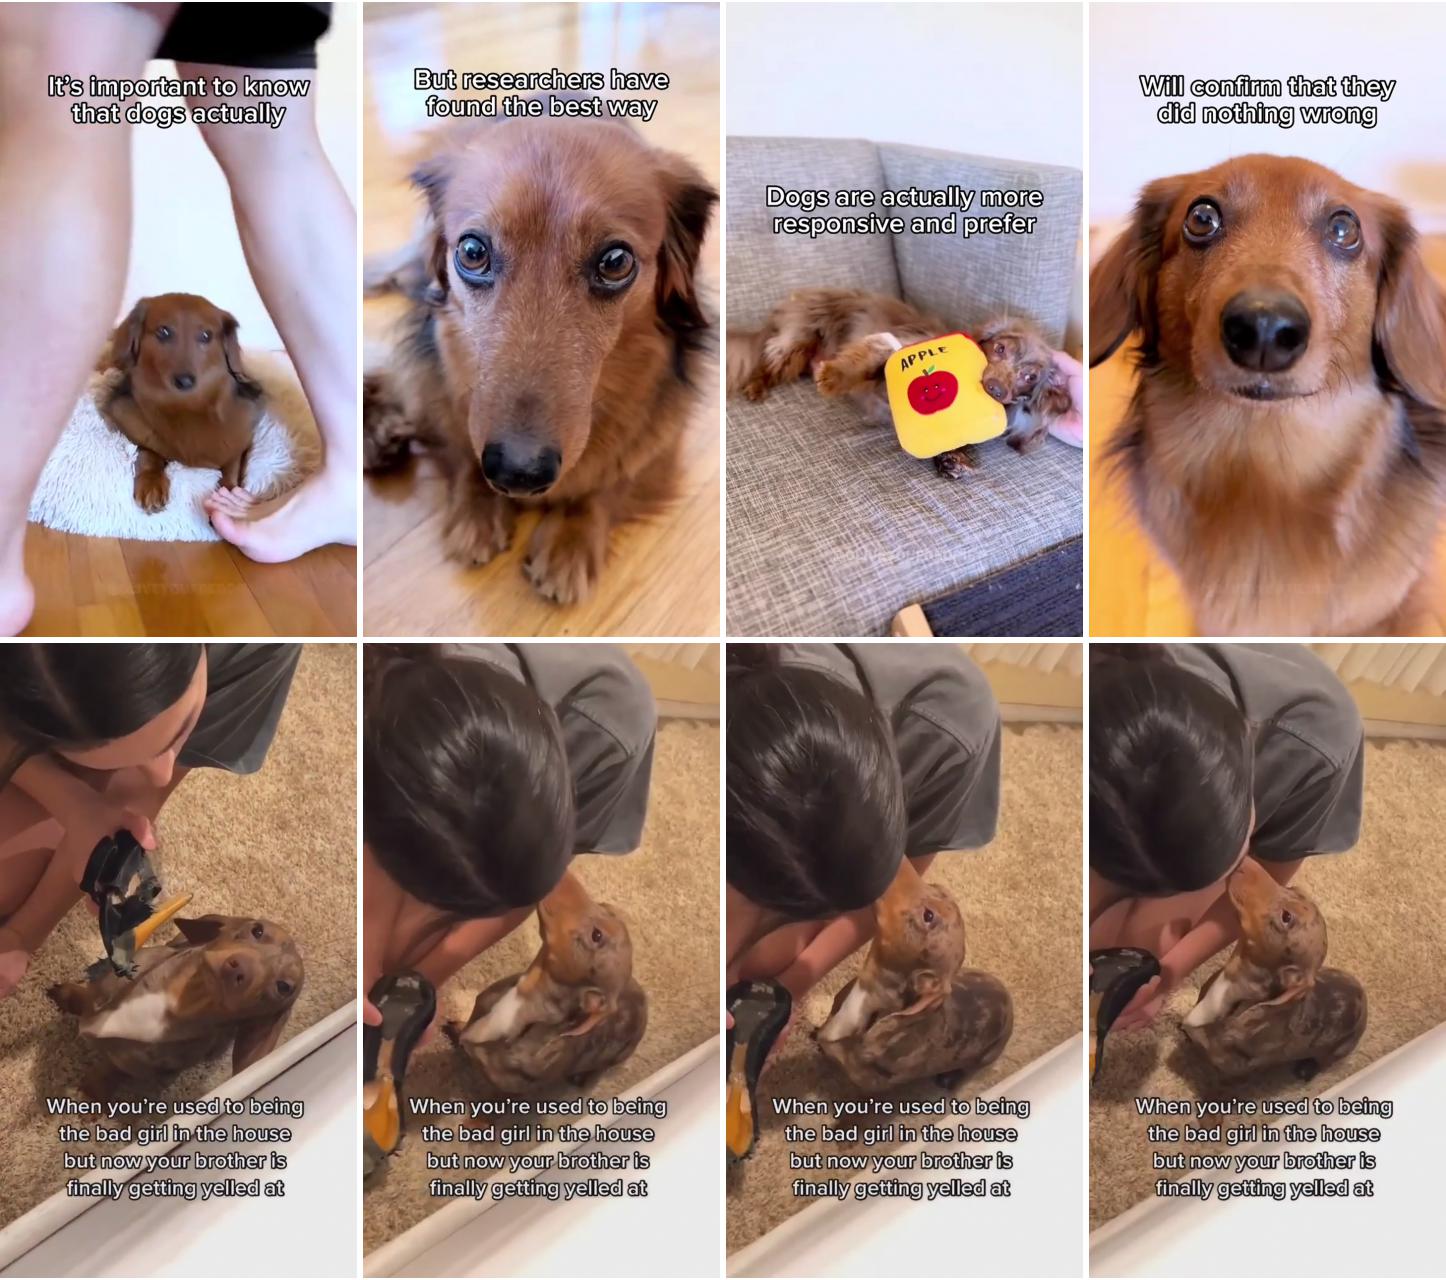 Deliciously fun diy dog training treats to keep your pup wagging; dachshund videos